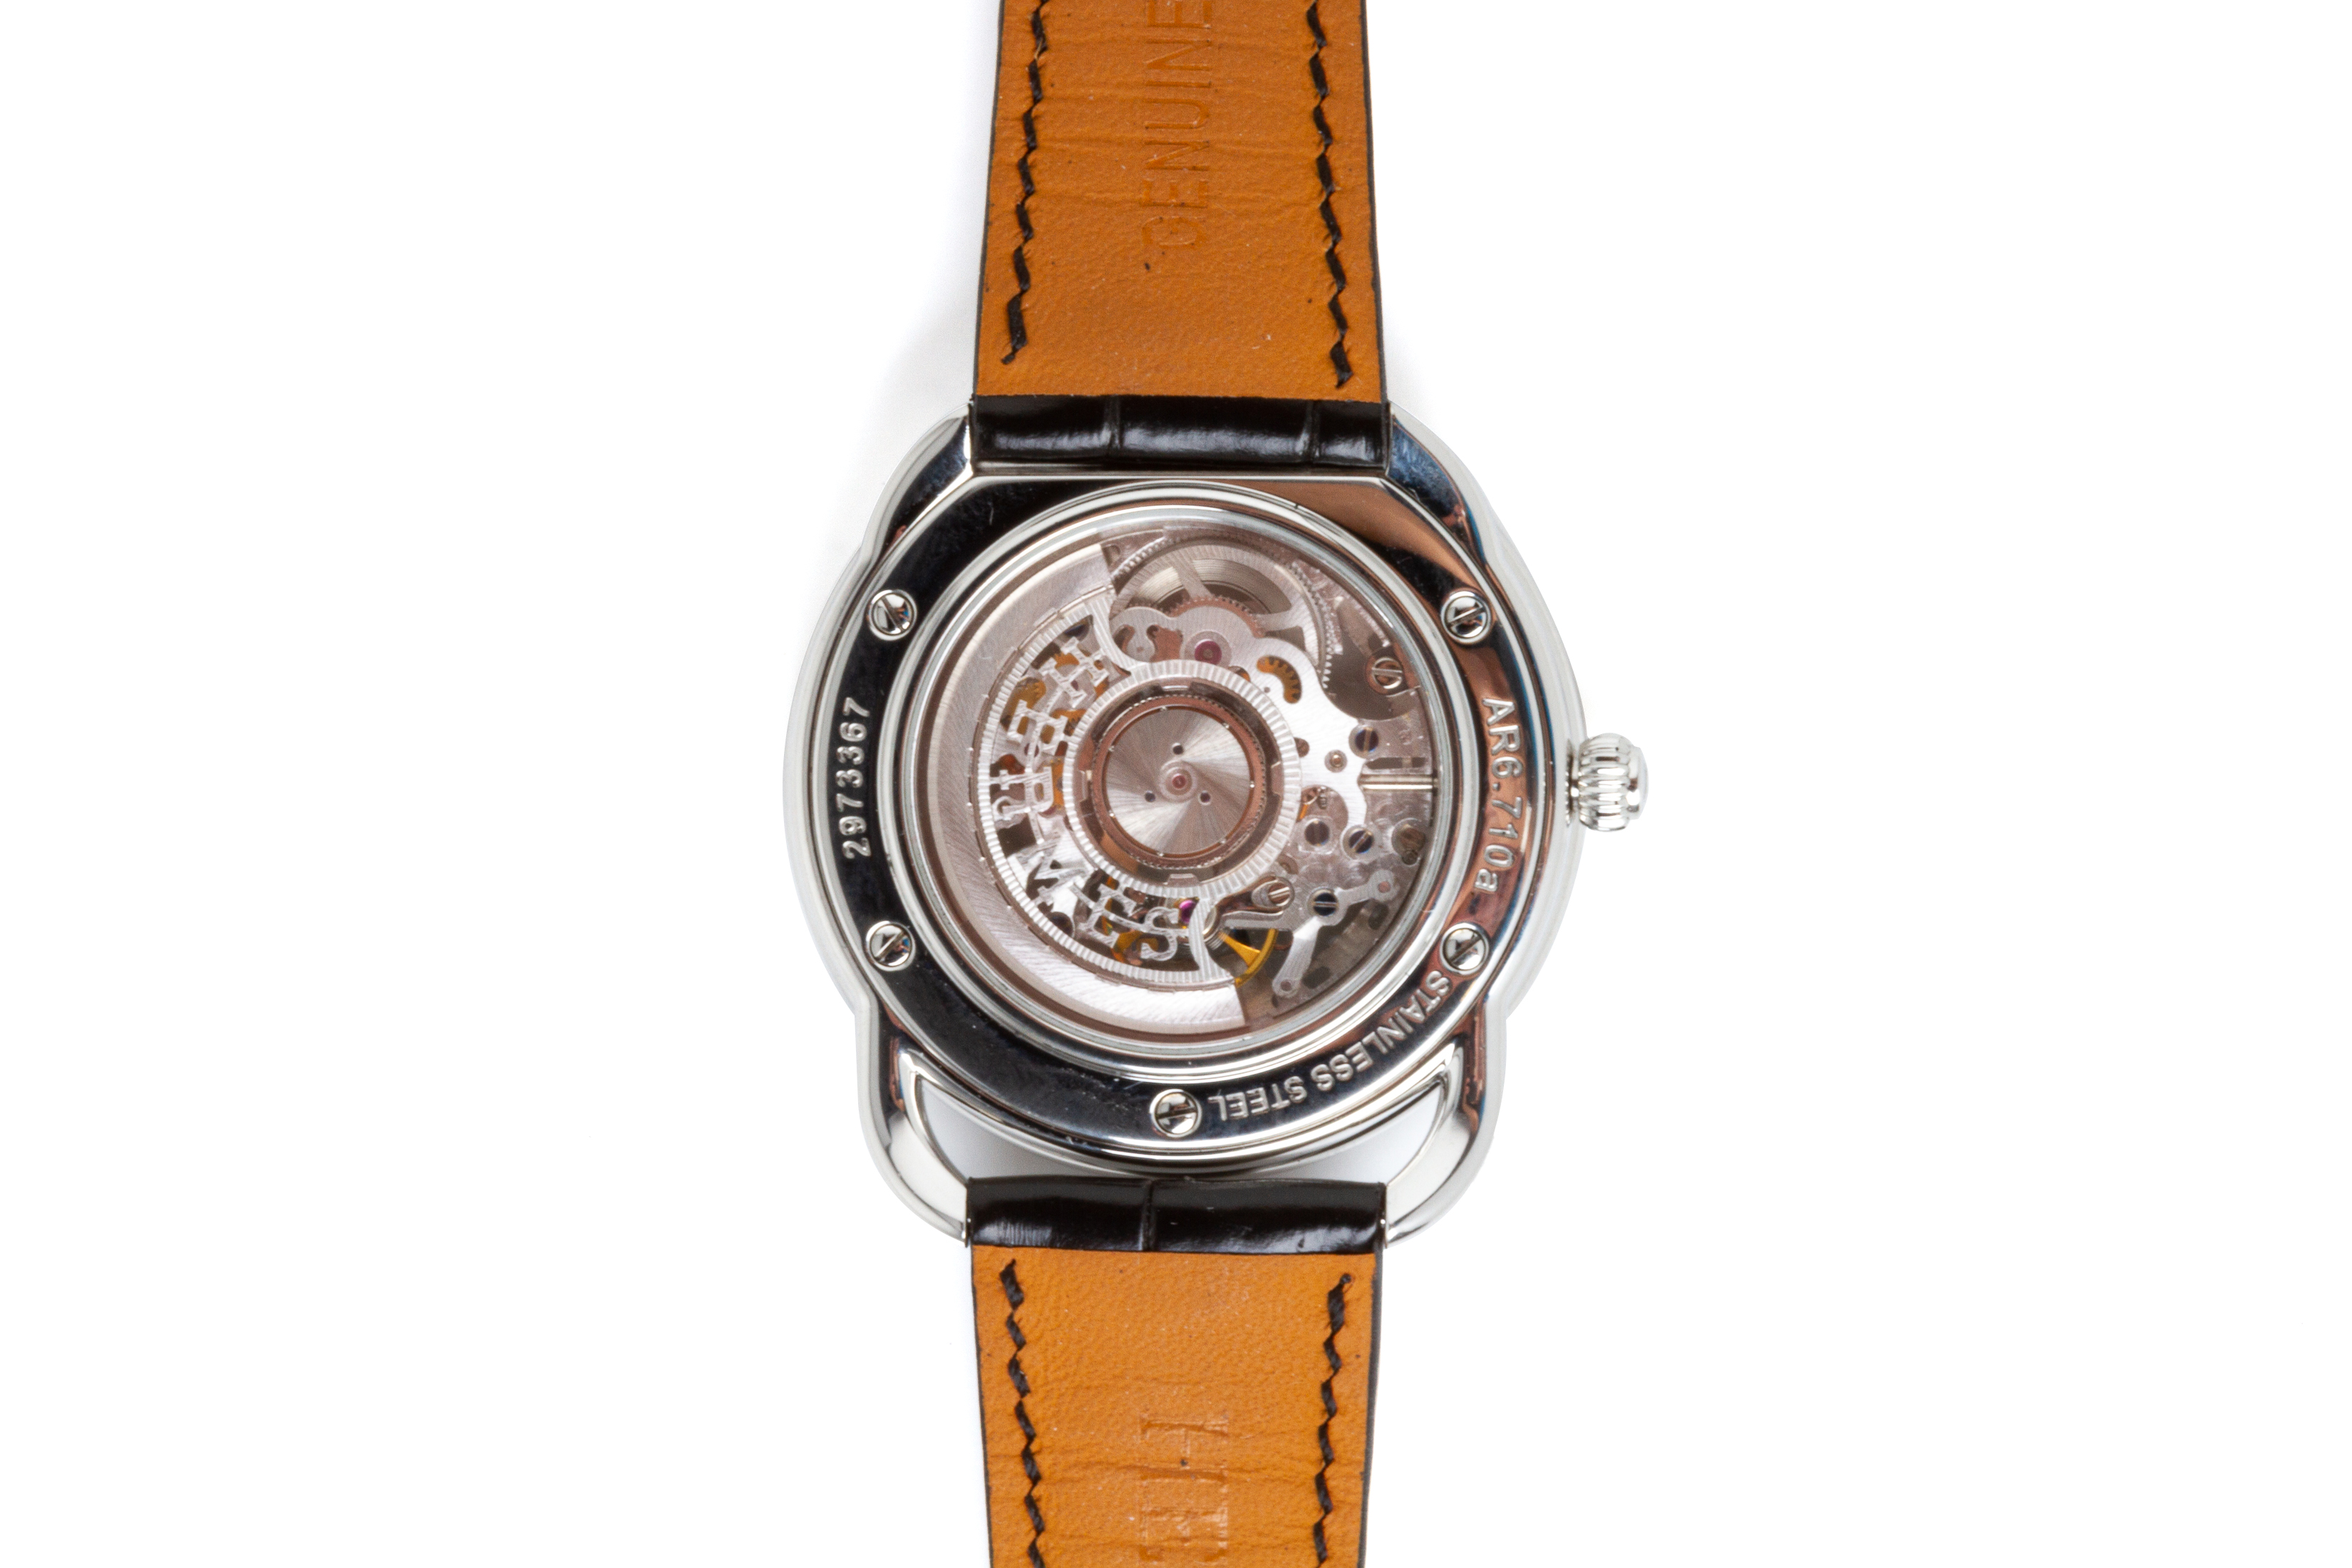 AN HERMES ARCEAU STAINLESS STEEL AUTOMATIC WRISTWATCH - Image 4 of 4